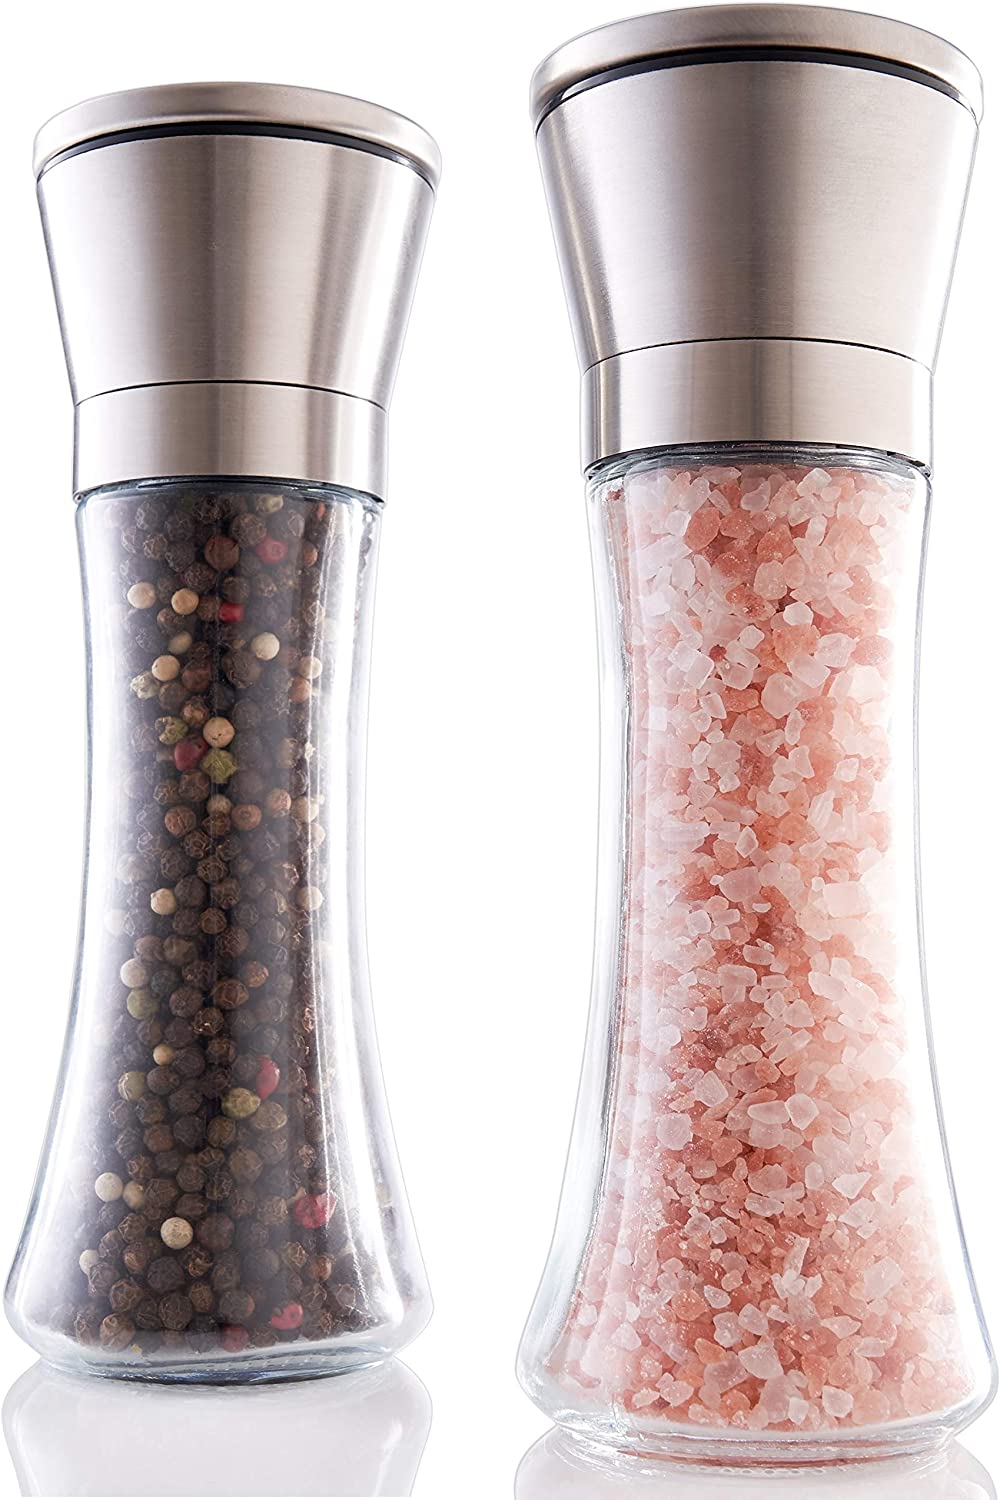 Urban Noon Premium Salt and Pepper Grinder Set - Stainless Steel Mills with Stand in Luxurious Gift-Box - Shakers with Ceramic Grinders and Adjustable